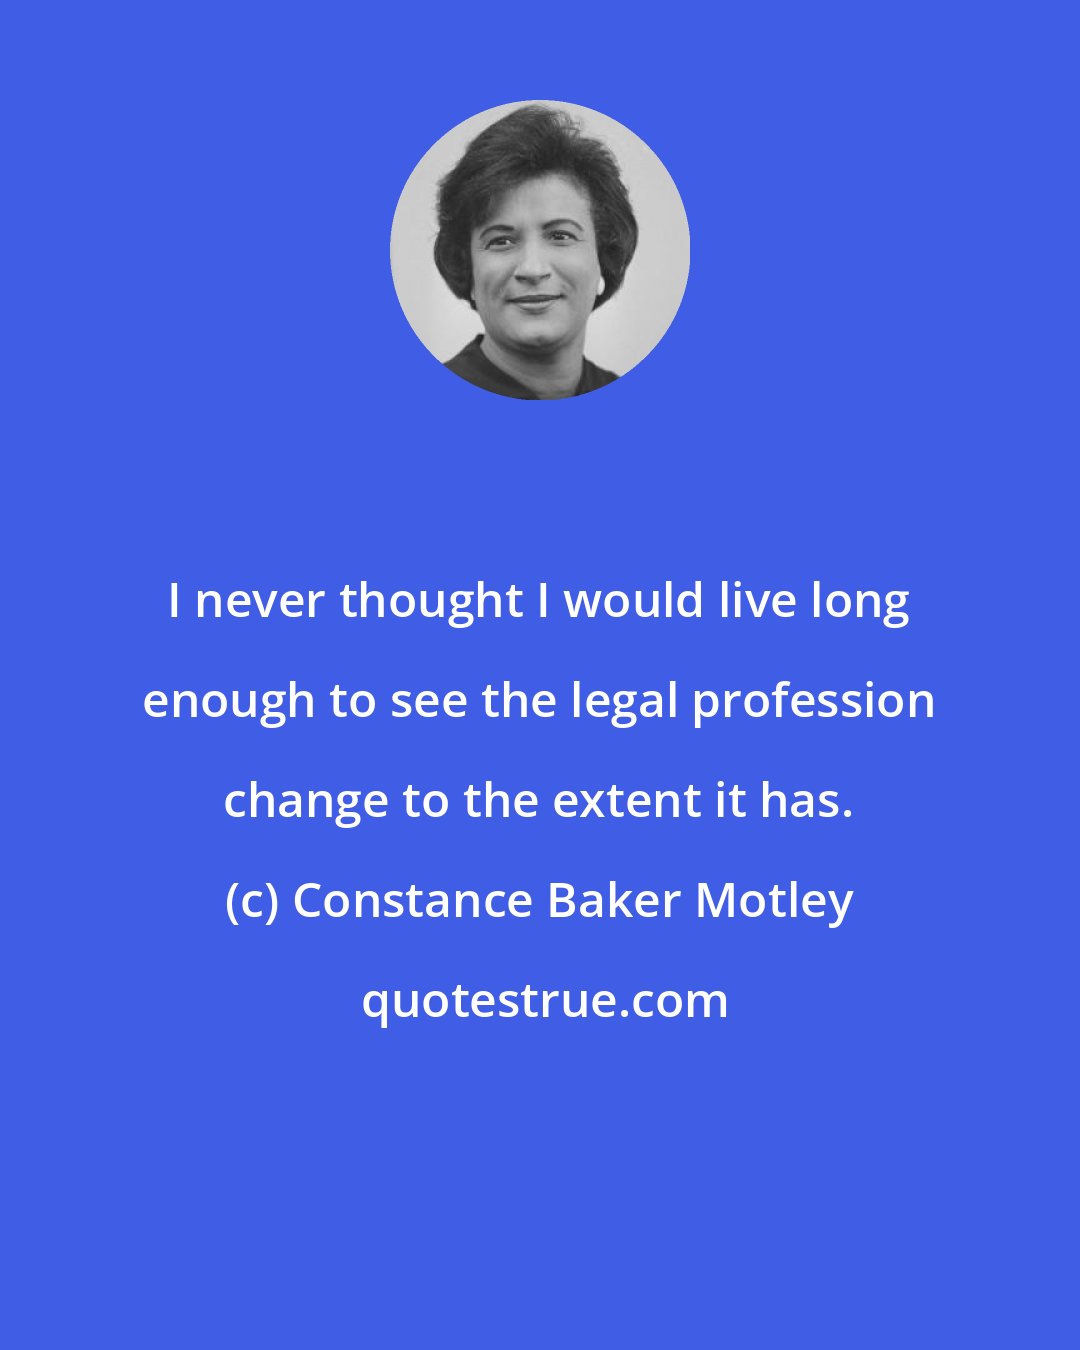 Constance Baker Motley: I never thought I would live long enough to see the legal profession change to the extent it has.